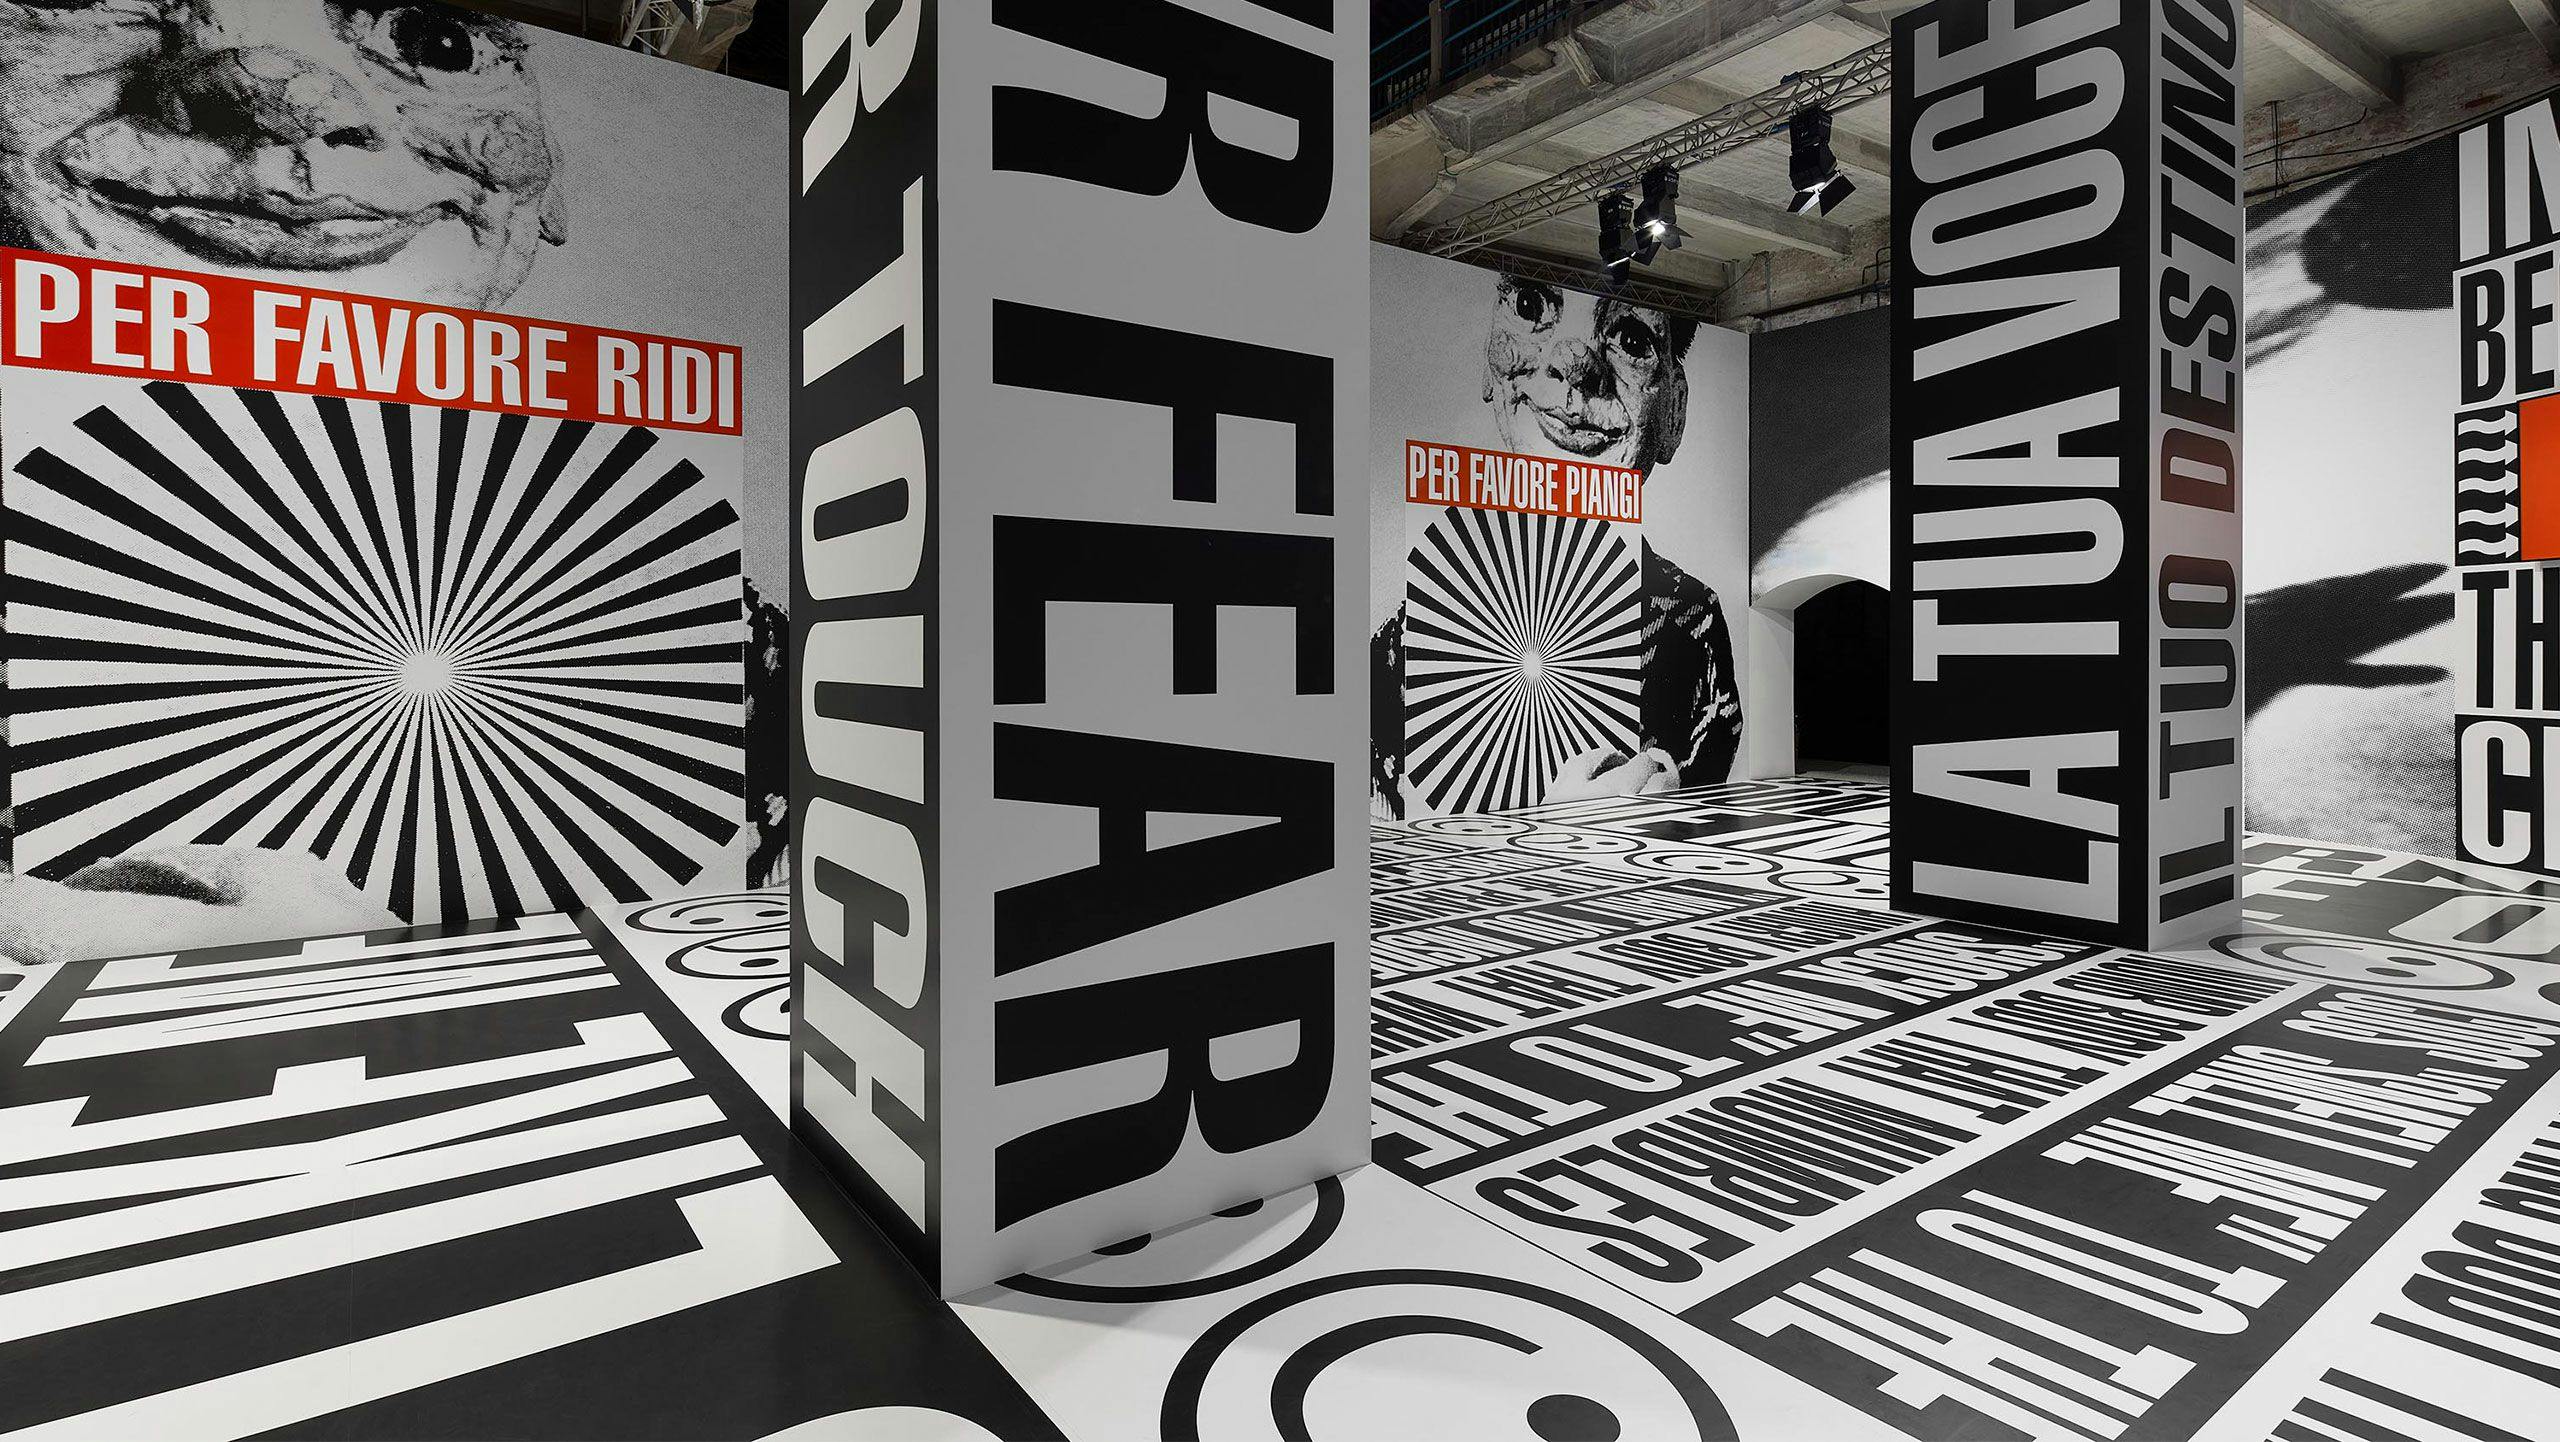 Installation view of Barbara Kruger at the 59th International Art Exhibition of La Biennale di Venezia, The Milk of Dreams, dated 2022.